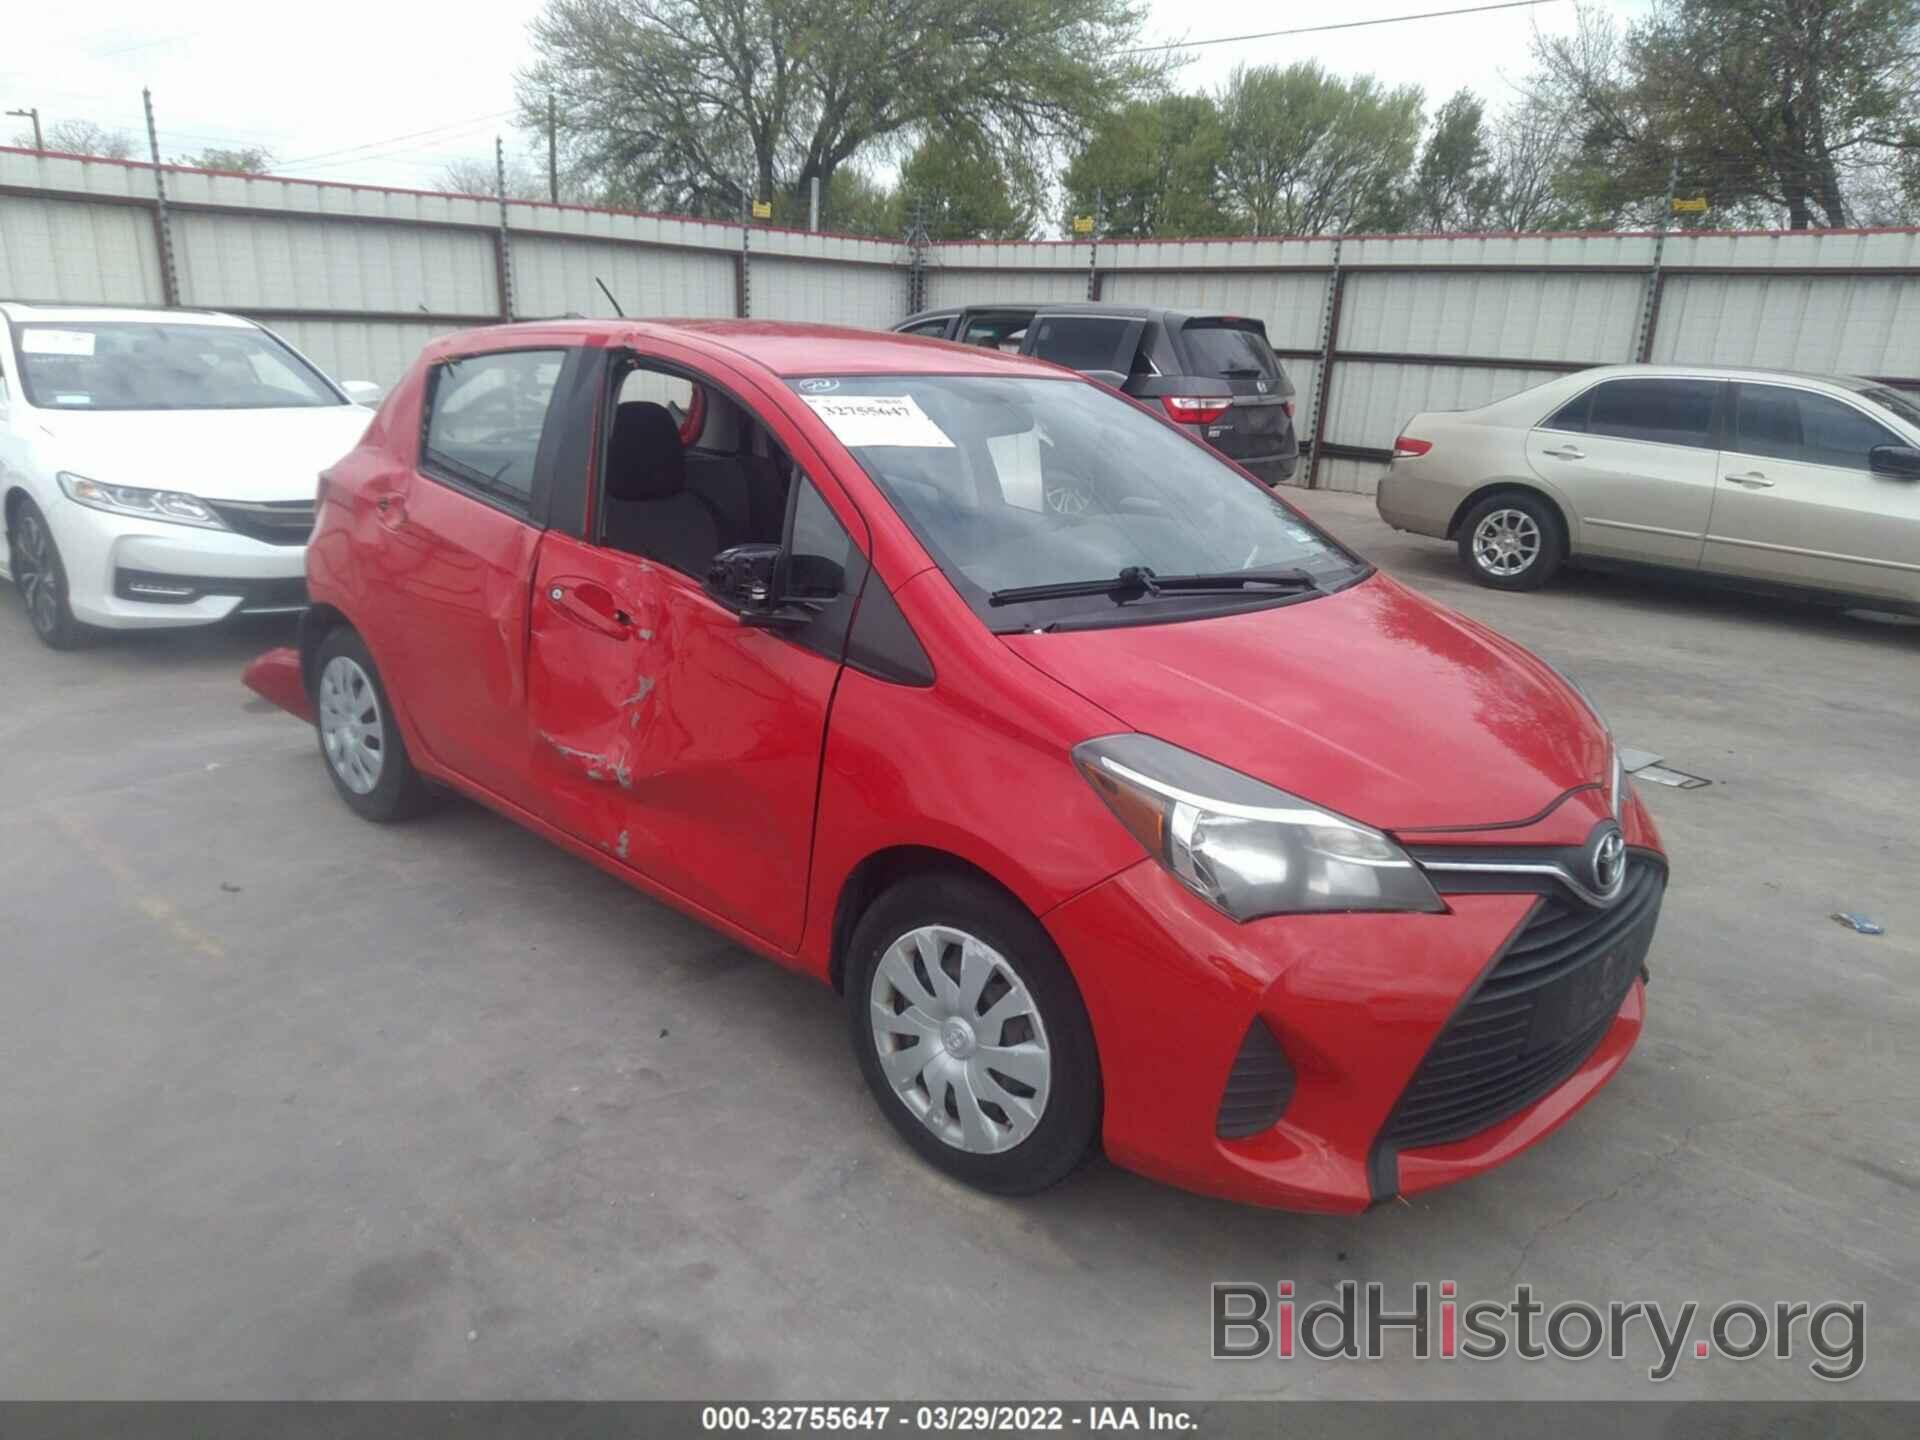 View TOYOTA YARIS history at insurance auctions Copart and IAAI 